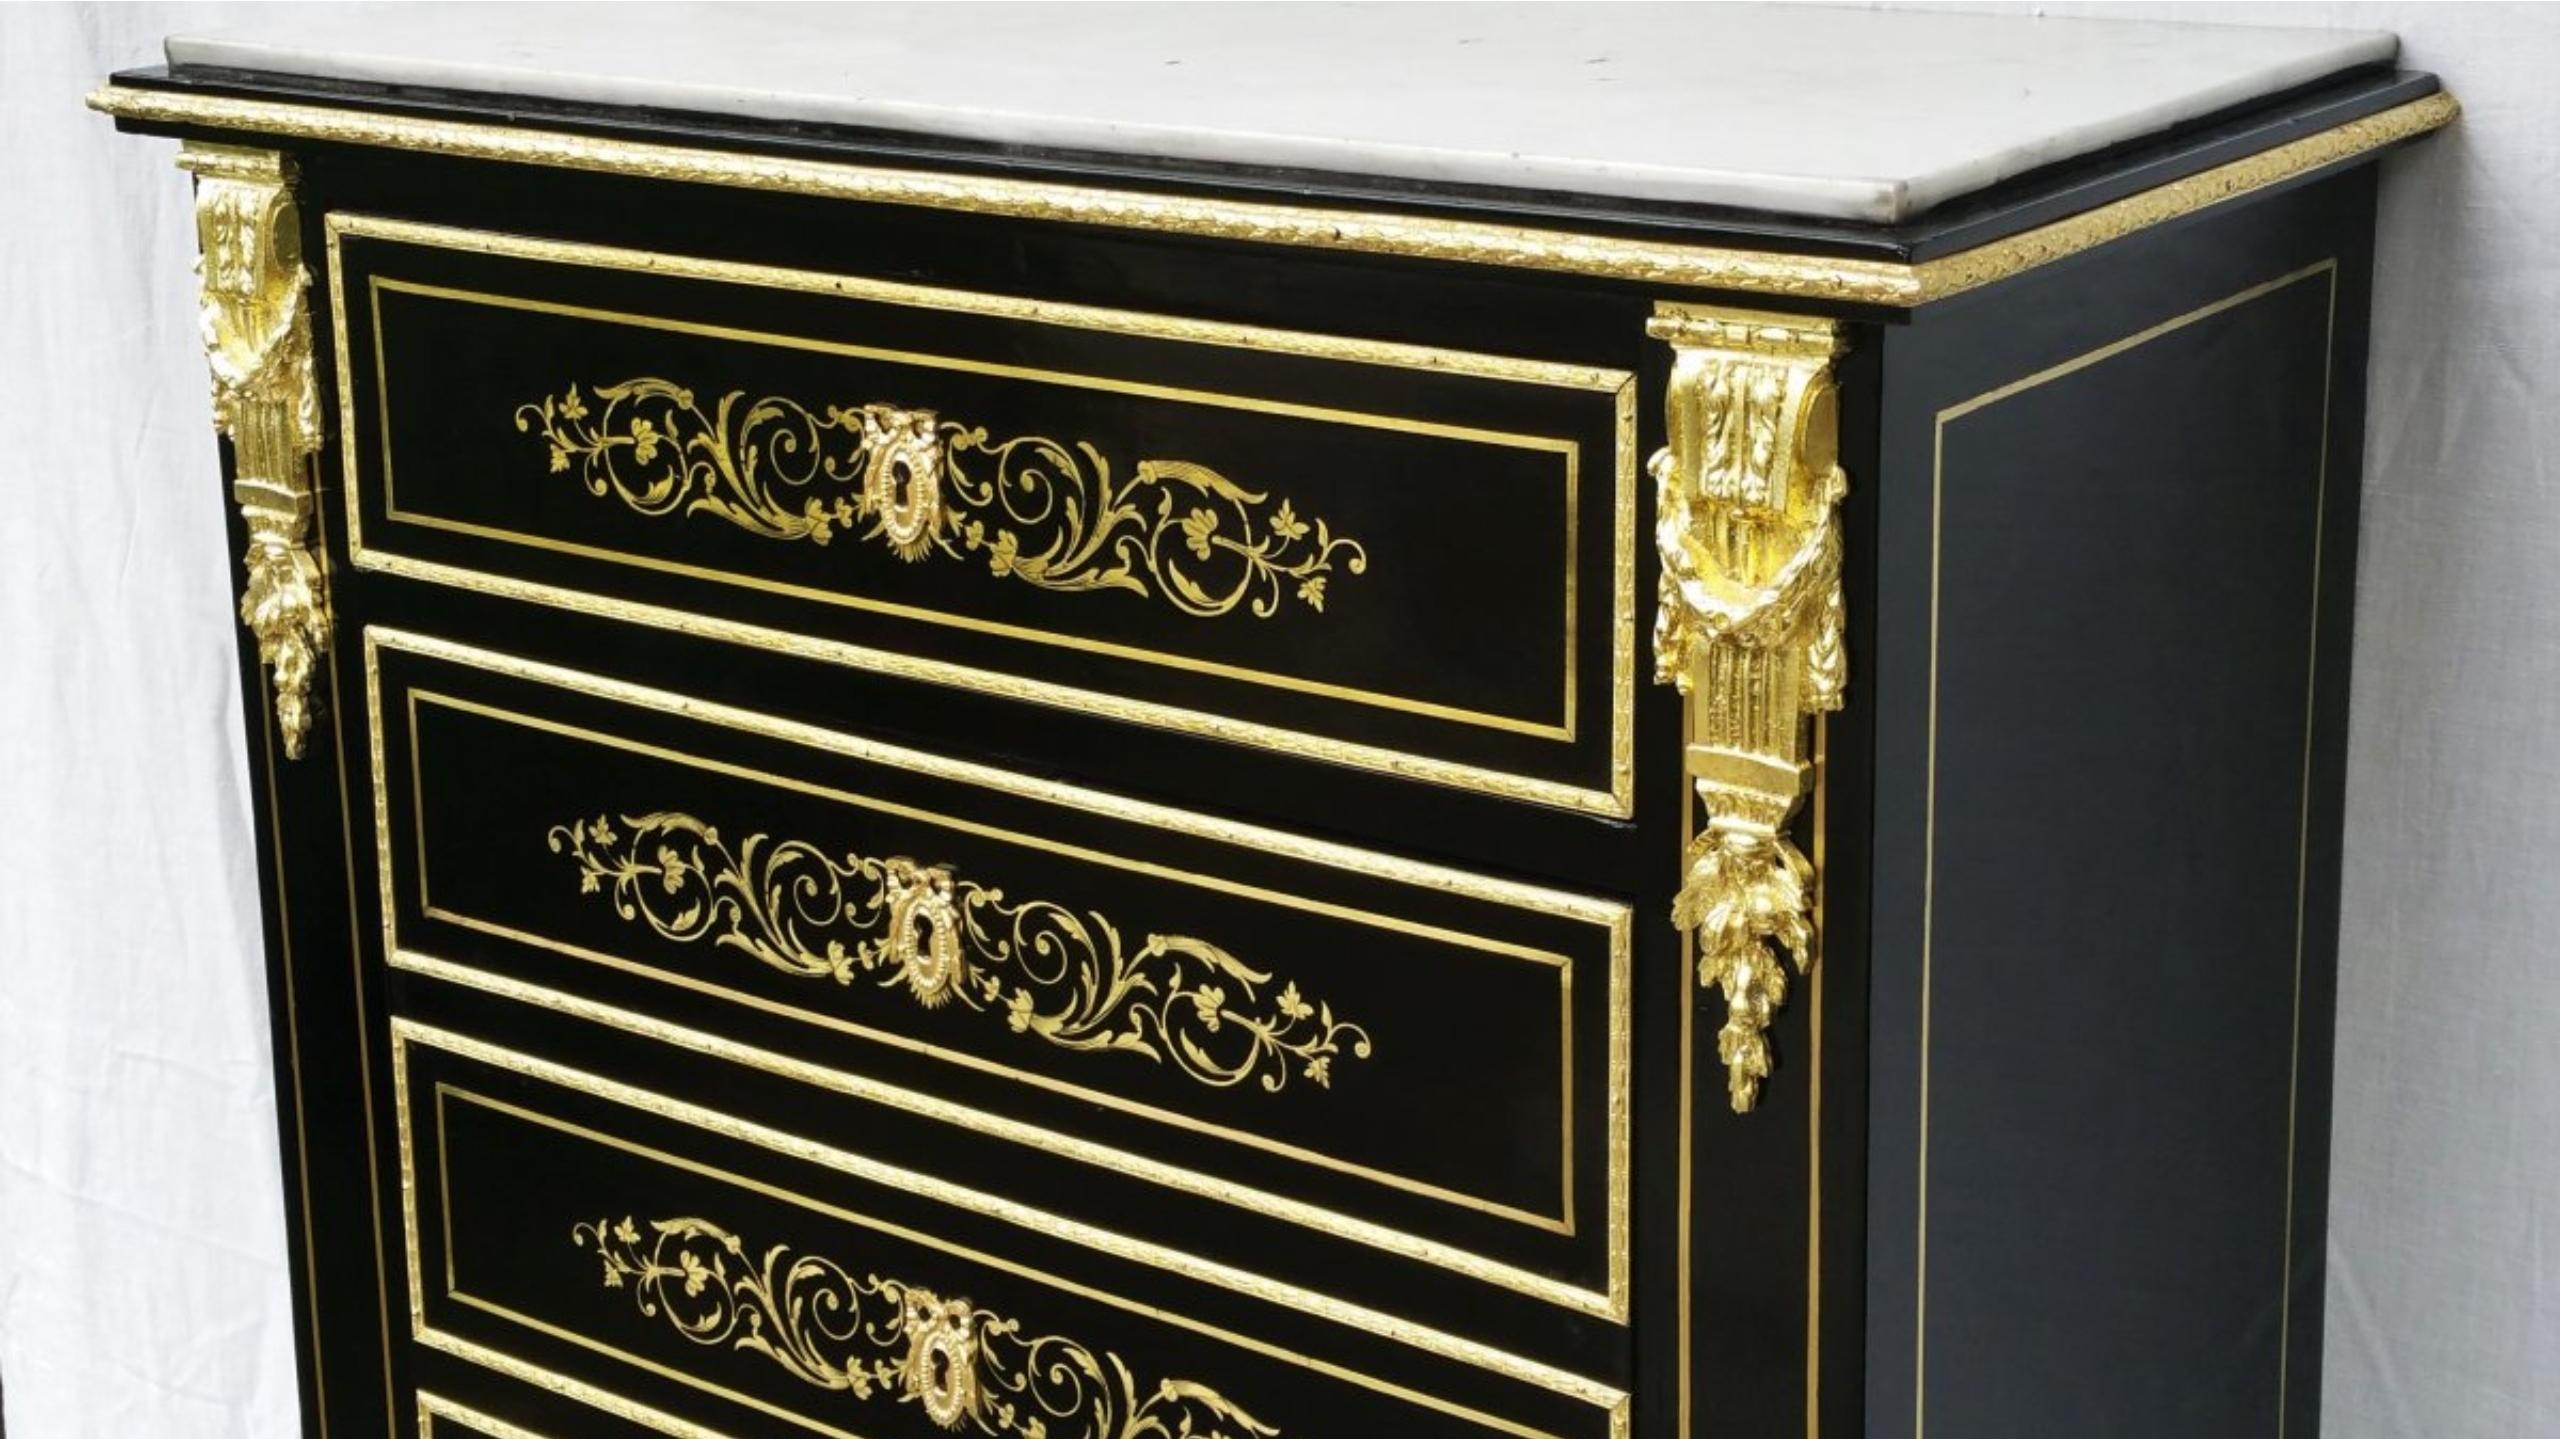 Napoleon III secretary in false week style blackened wood veneer with Boulle style marquetry with brass and gilt bronze ornaments and a white Carrara marble top. Opens on a very elegant theatre in noble wood burl and amaranth, 2 drawers are